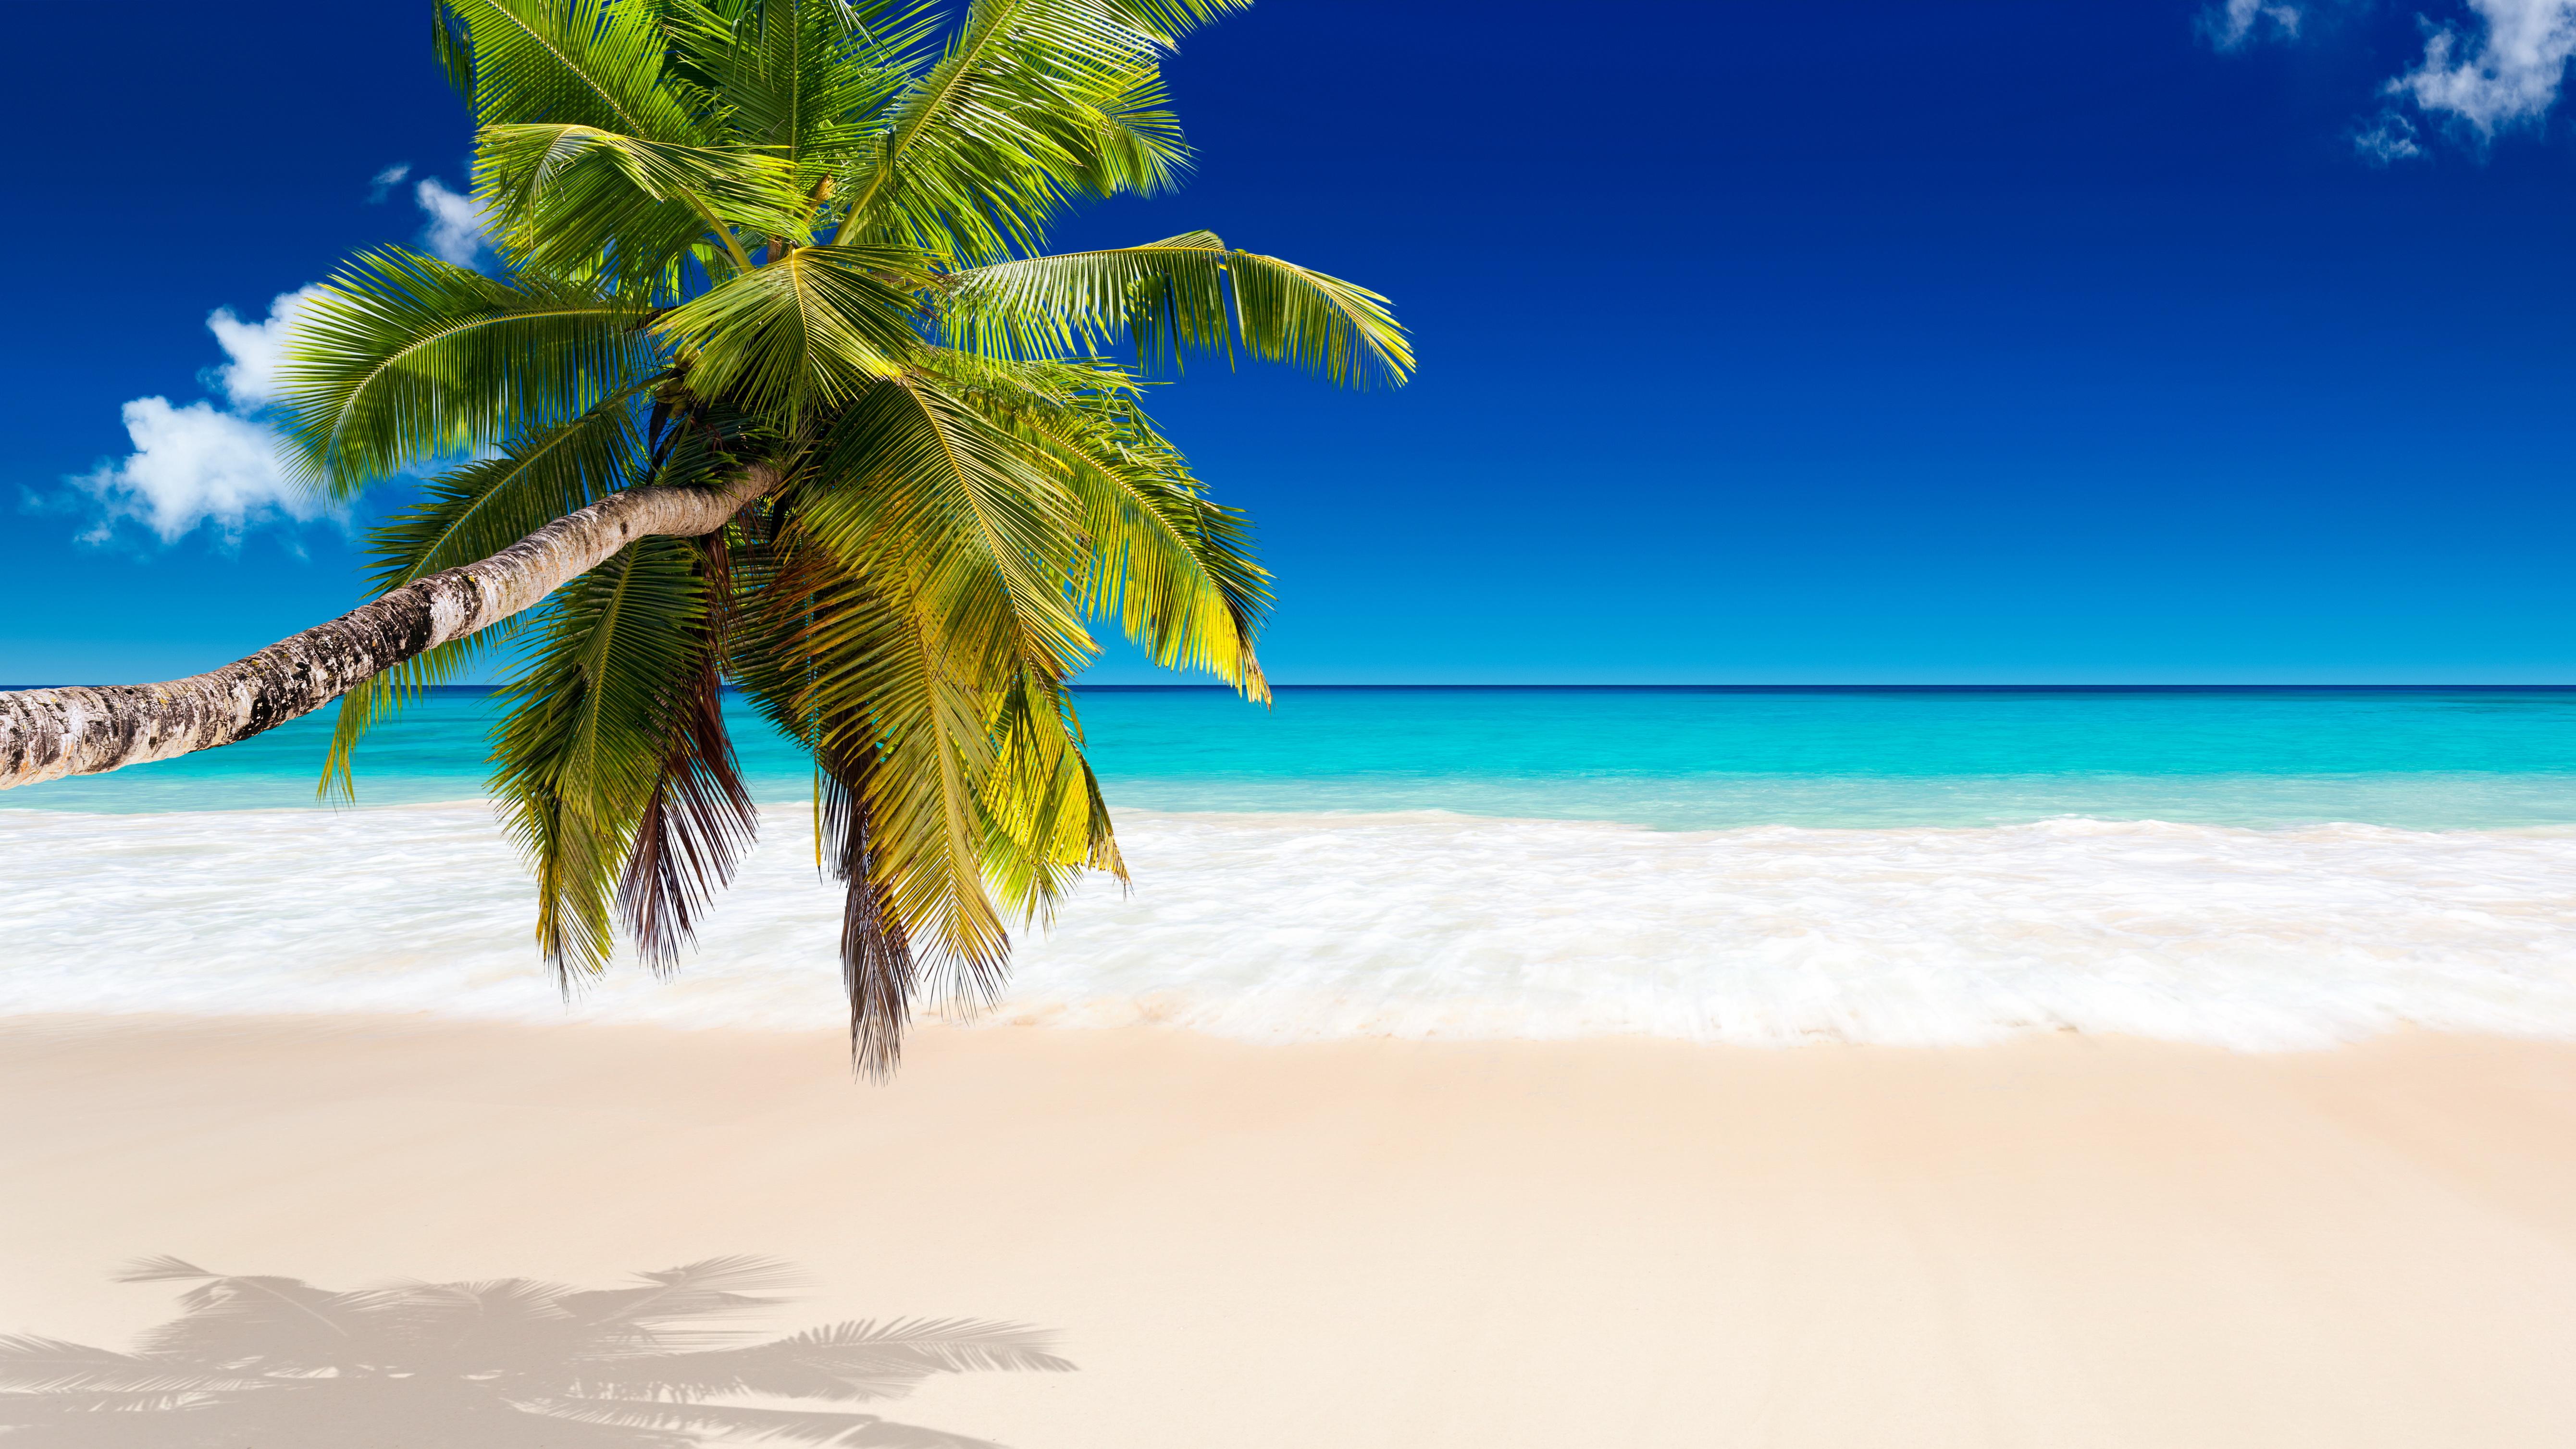 5360 x 3015 · jpeg - Tropical Beach Wallpapers, Pictures, Images